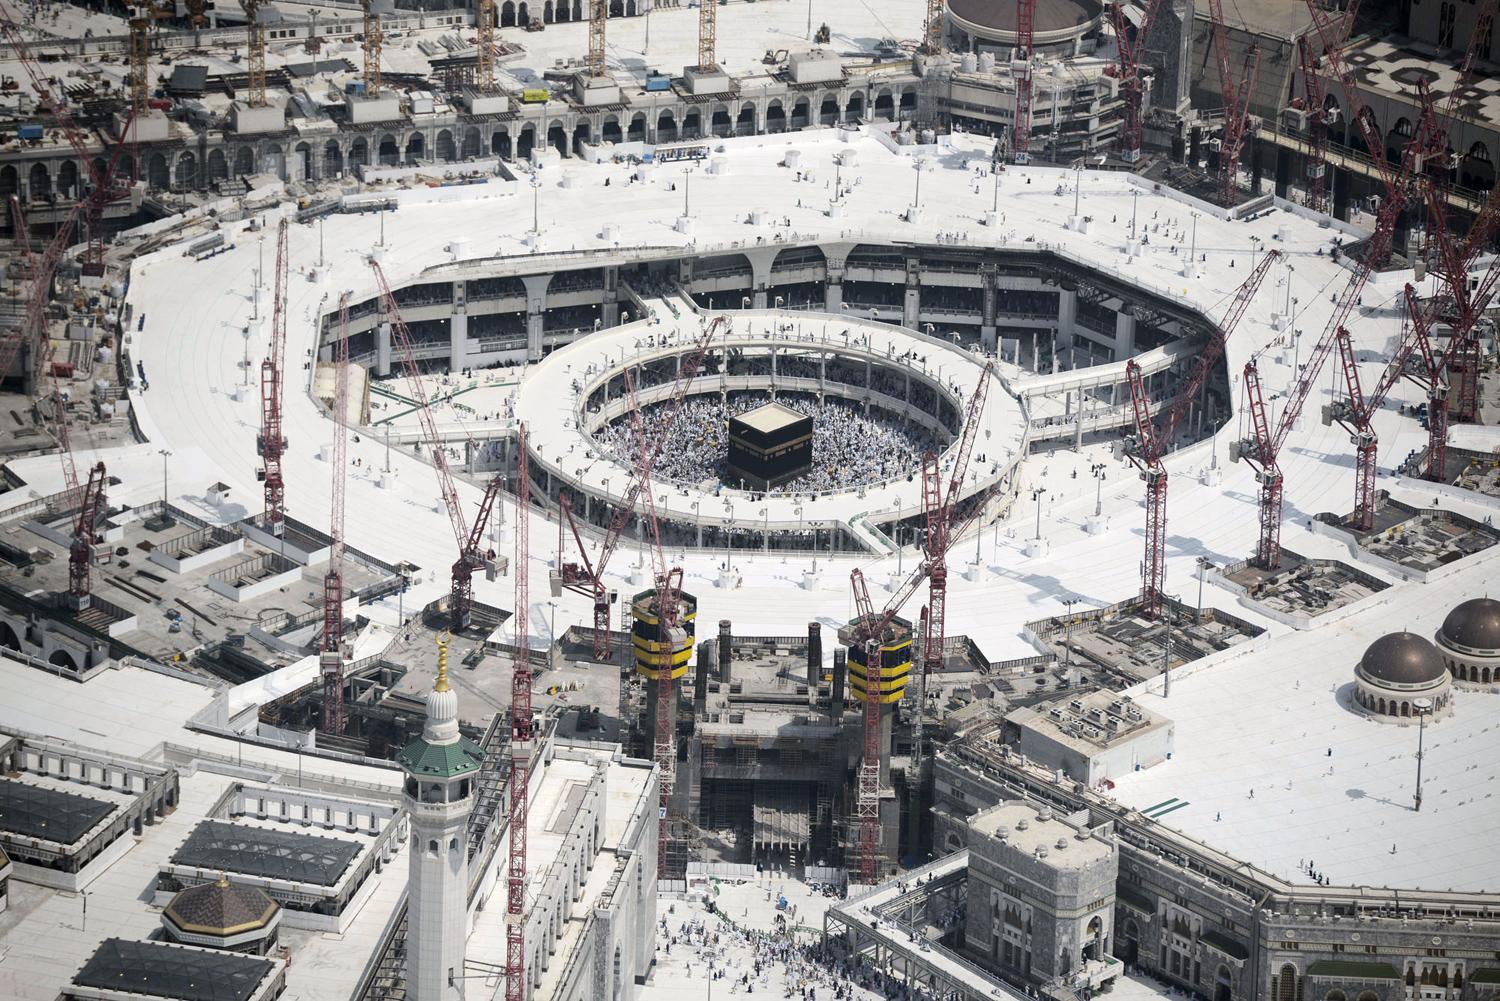 Mecca Then and Now, 126 Years of Growth - The Atlantic